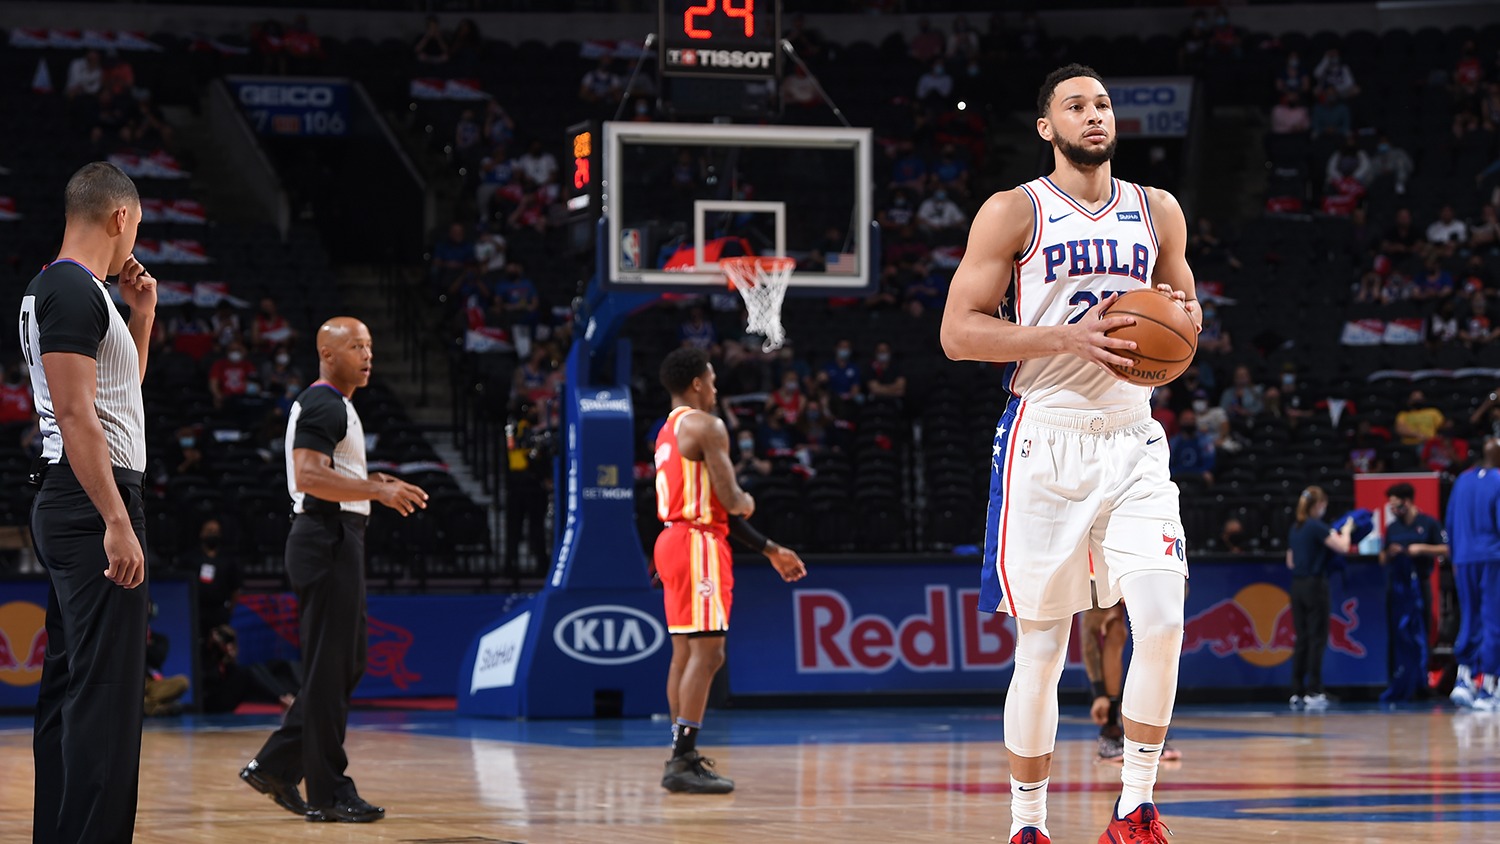 Sixers-Nets Showdown: Ben Simmons and Doc Rivers Share Words